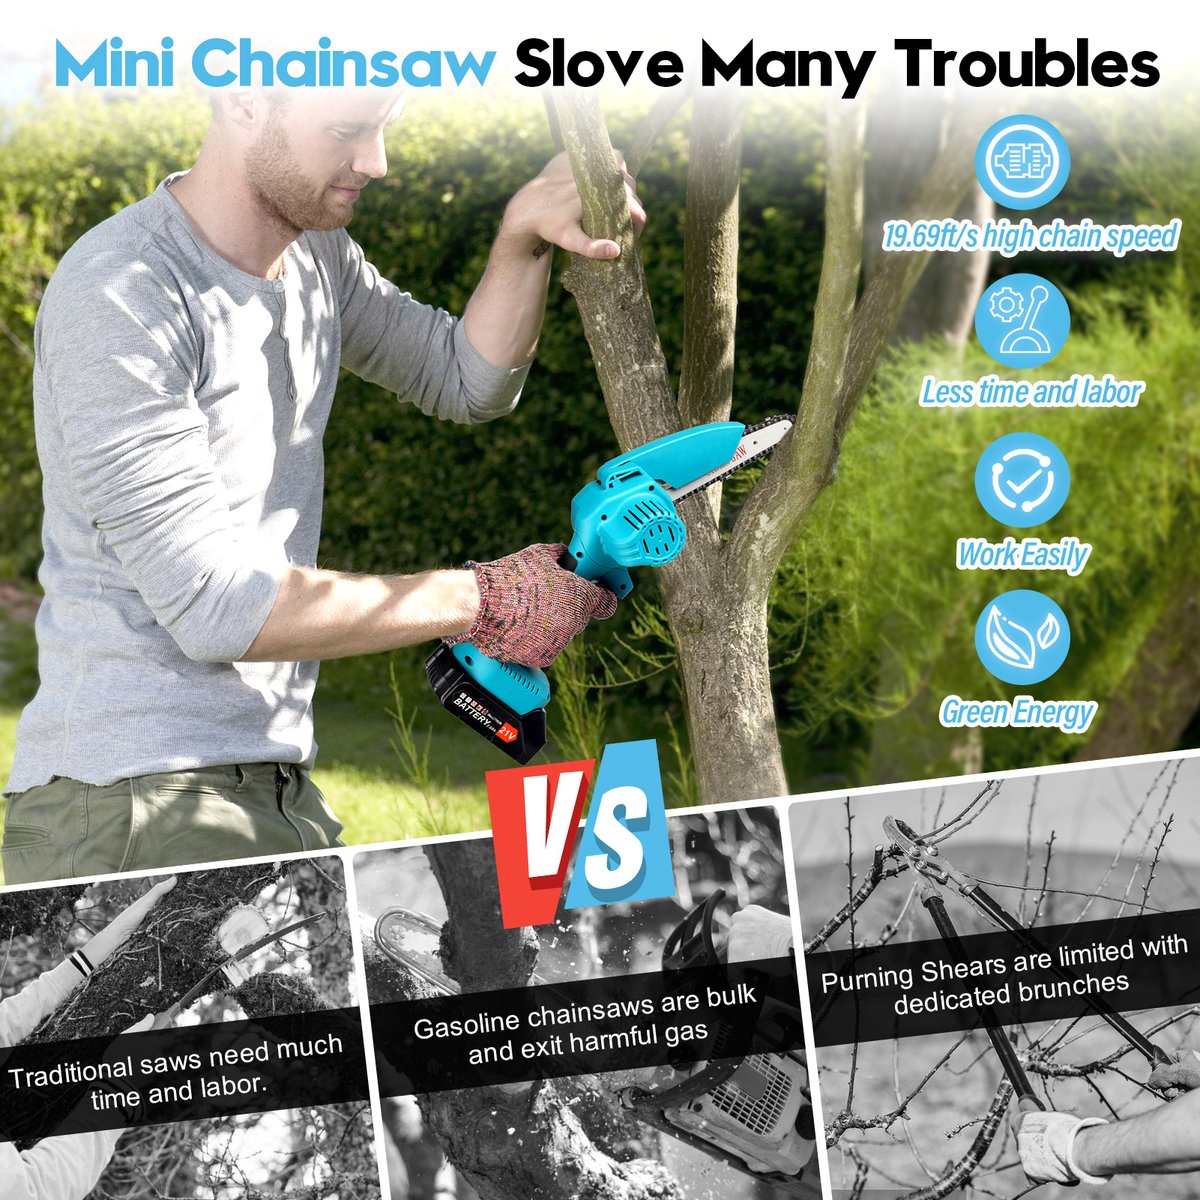 Mini chainsaws solve many troubles.
Less time and labor
No oil, no smoke
elecicopo.com/products/cordl…

#chainsaw #saw #Tools #gardentool